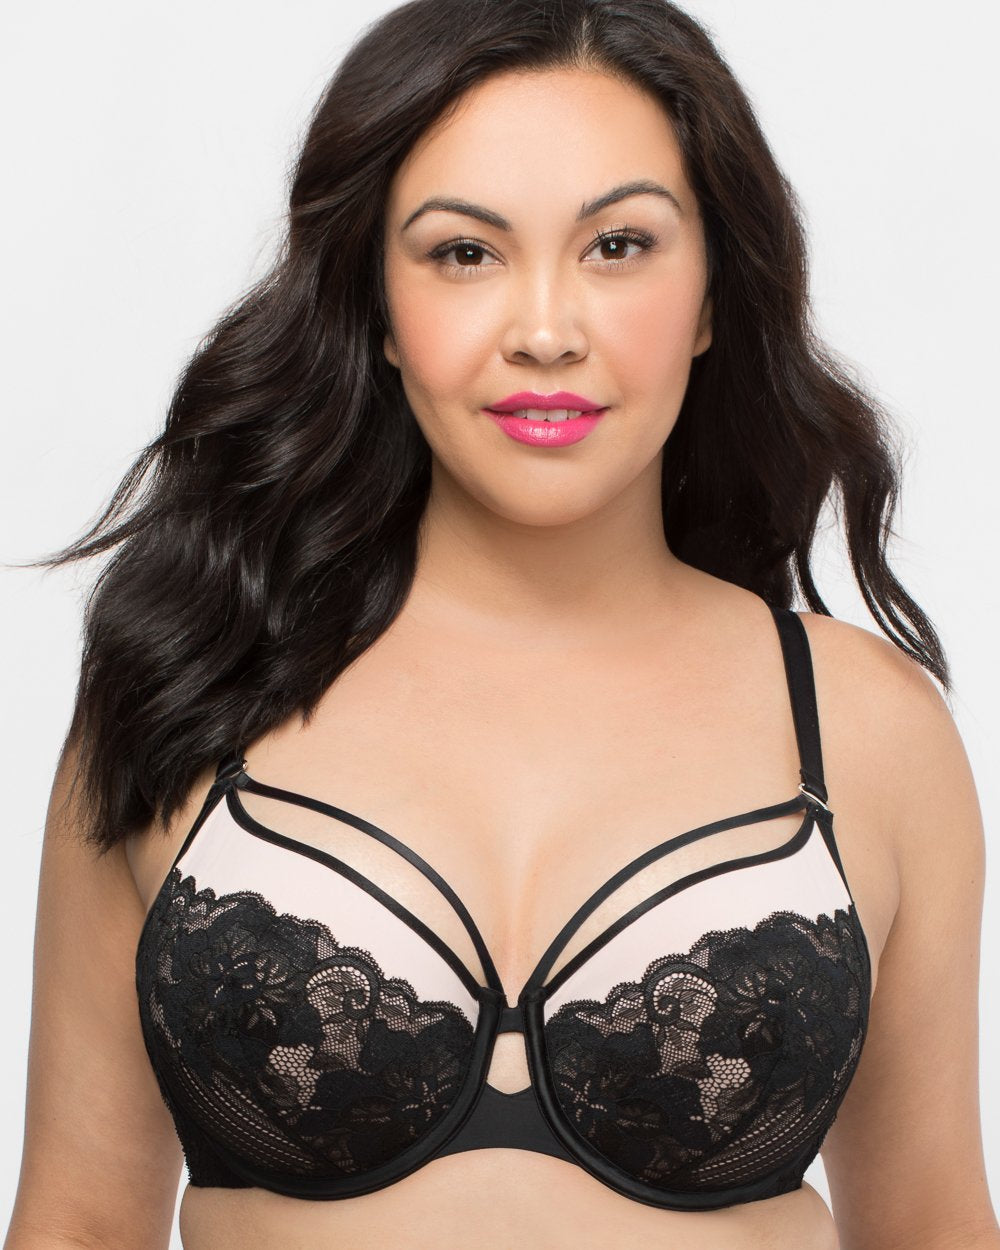 TLC Lingerie - We dare you to try Curvy Couture Strappy